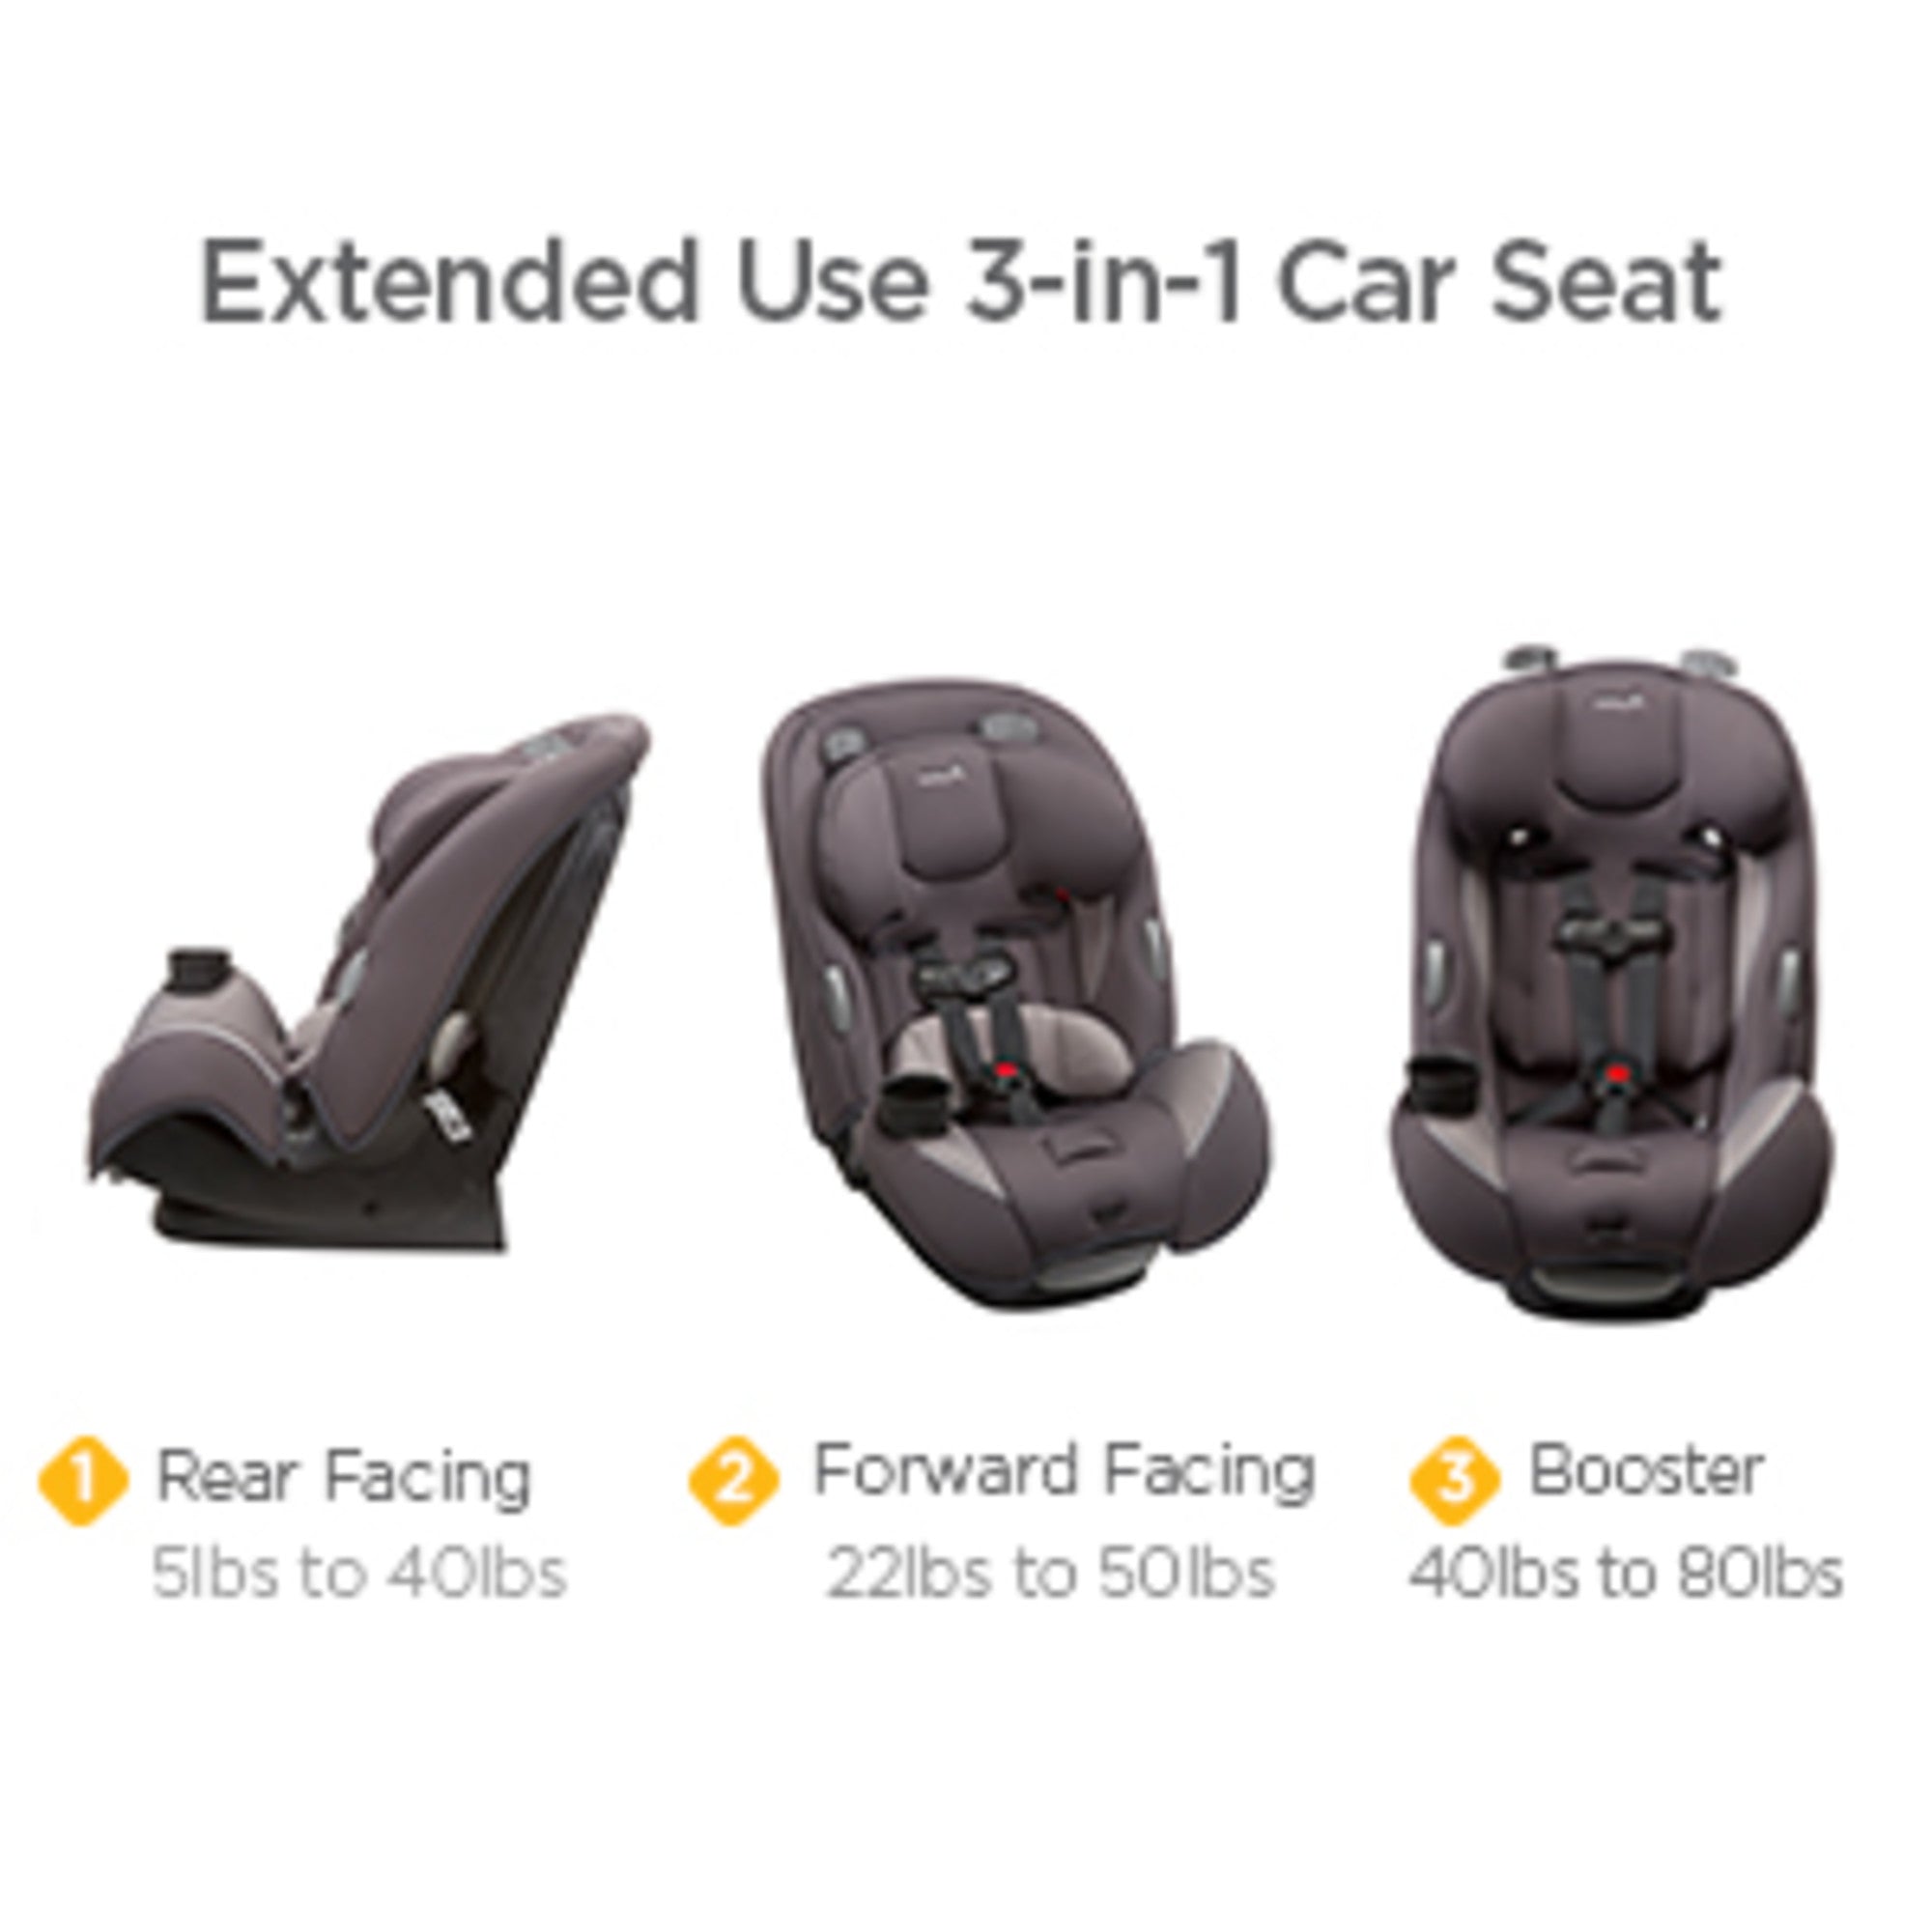 Extended use 3 in 1 car seat. Rear facing, forward facing and booster.